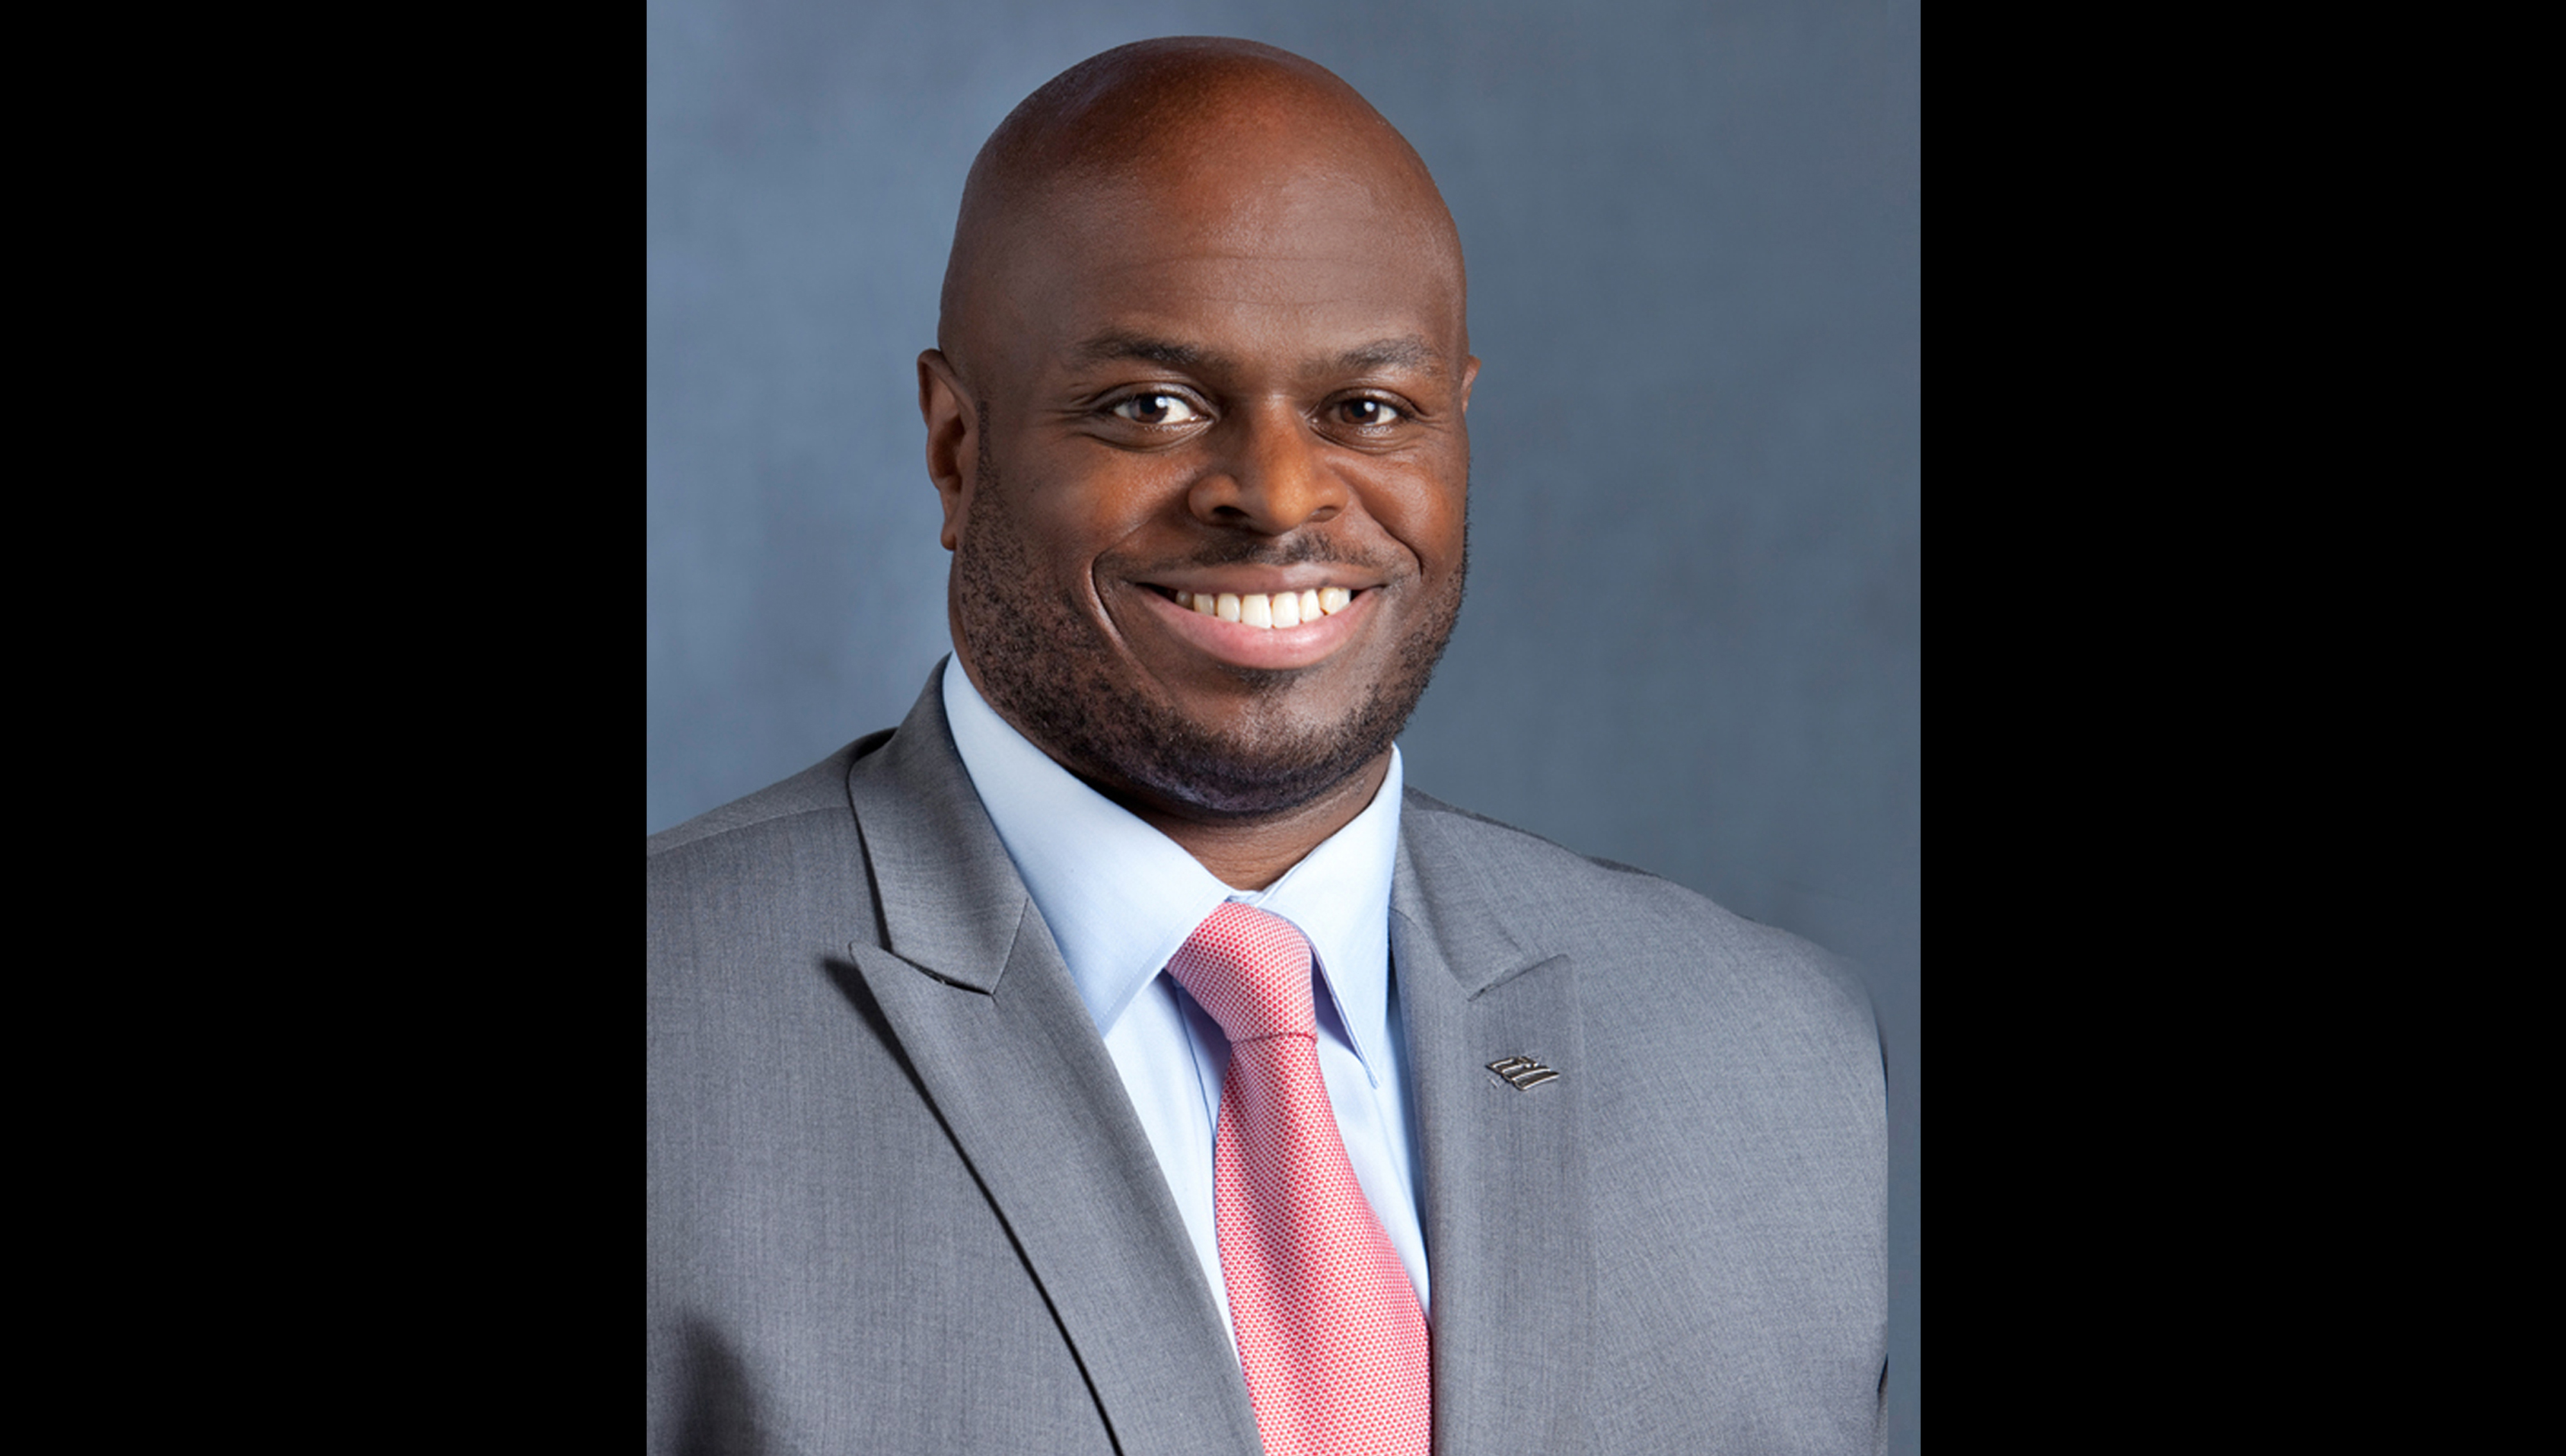 Del State President Tony Allen has been named to serve as the Chief Executive Officer on the Biden-Harris Presidential Inauguration Committee.